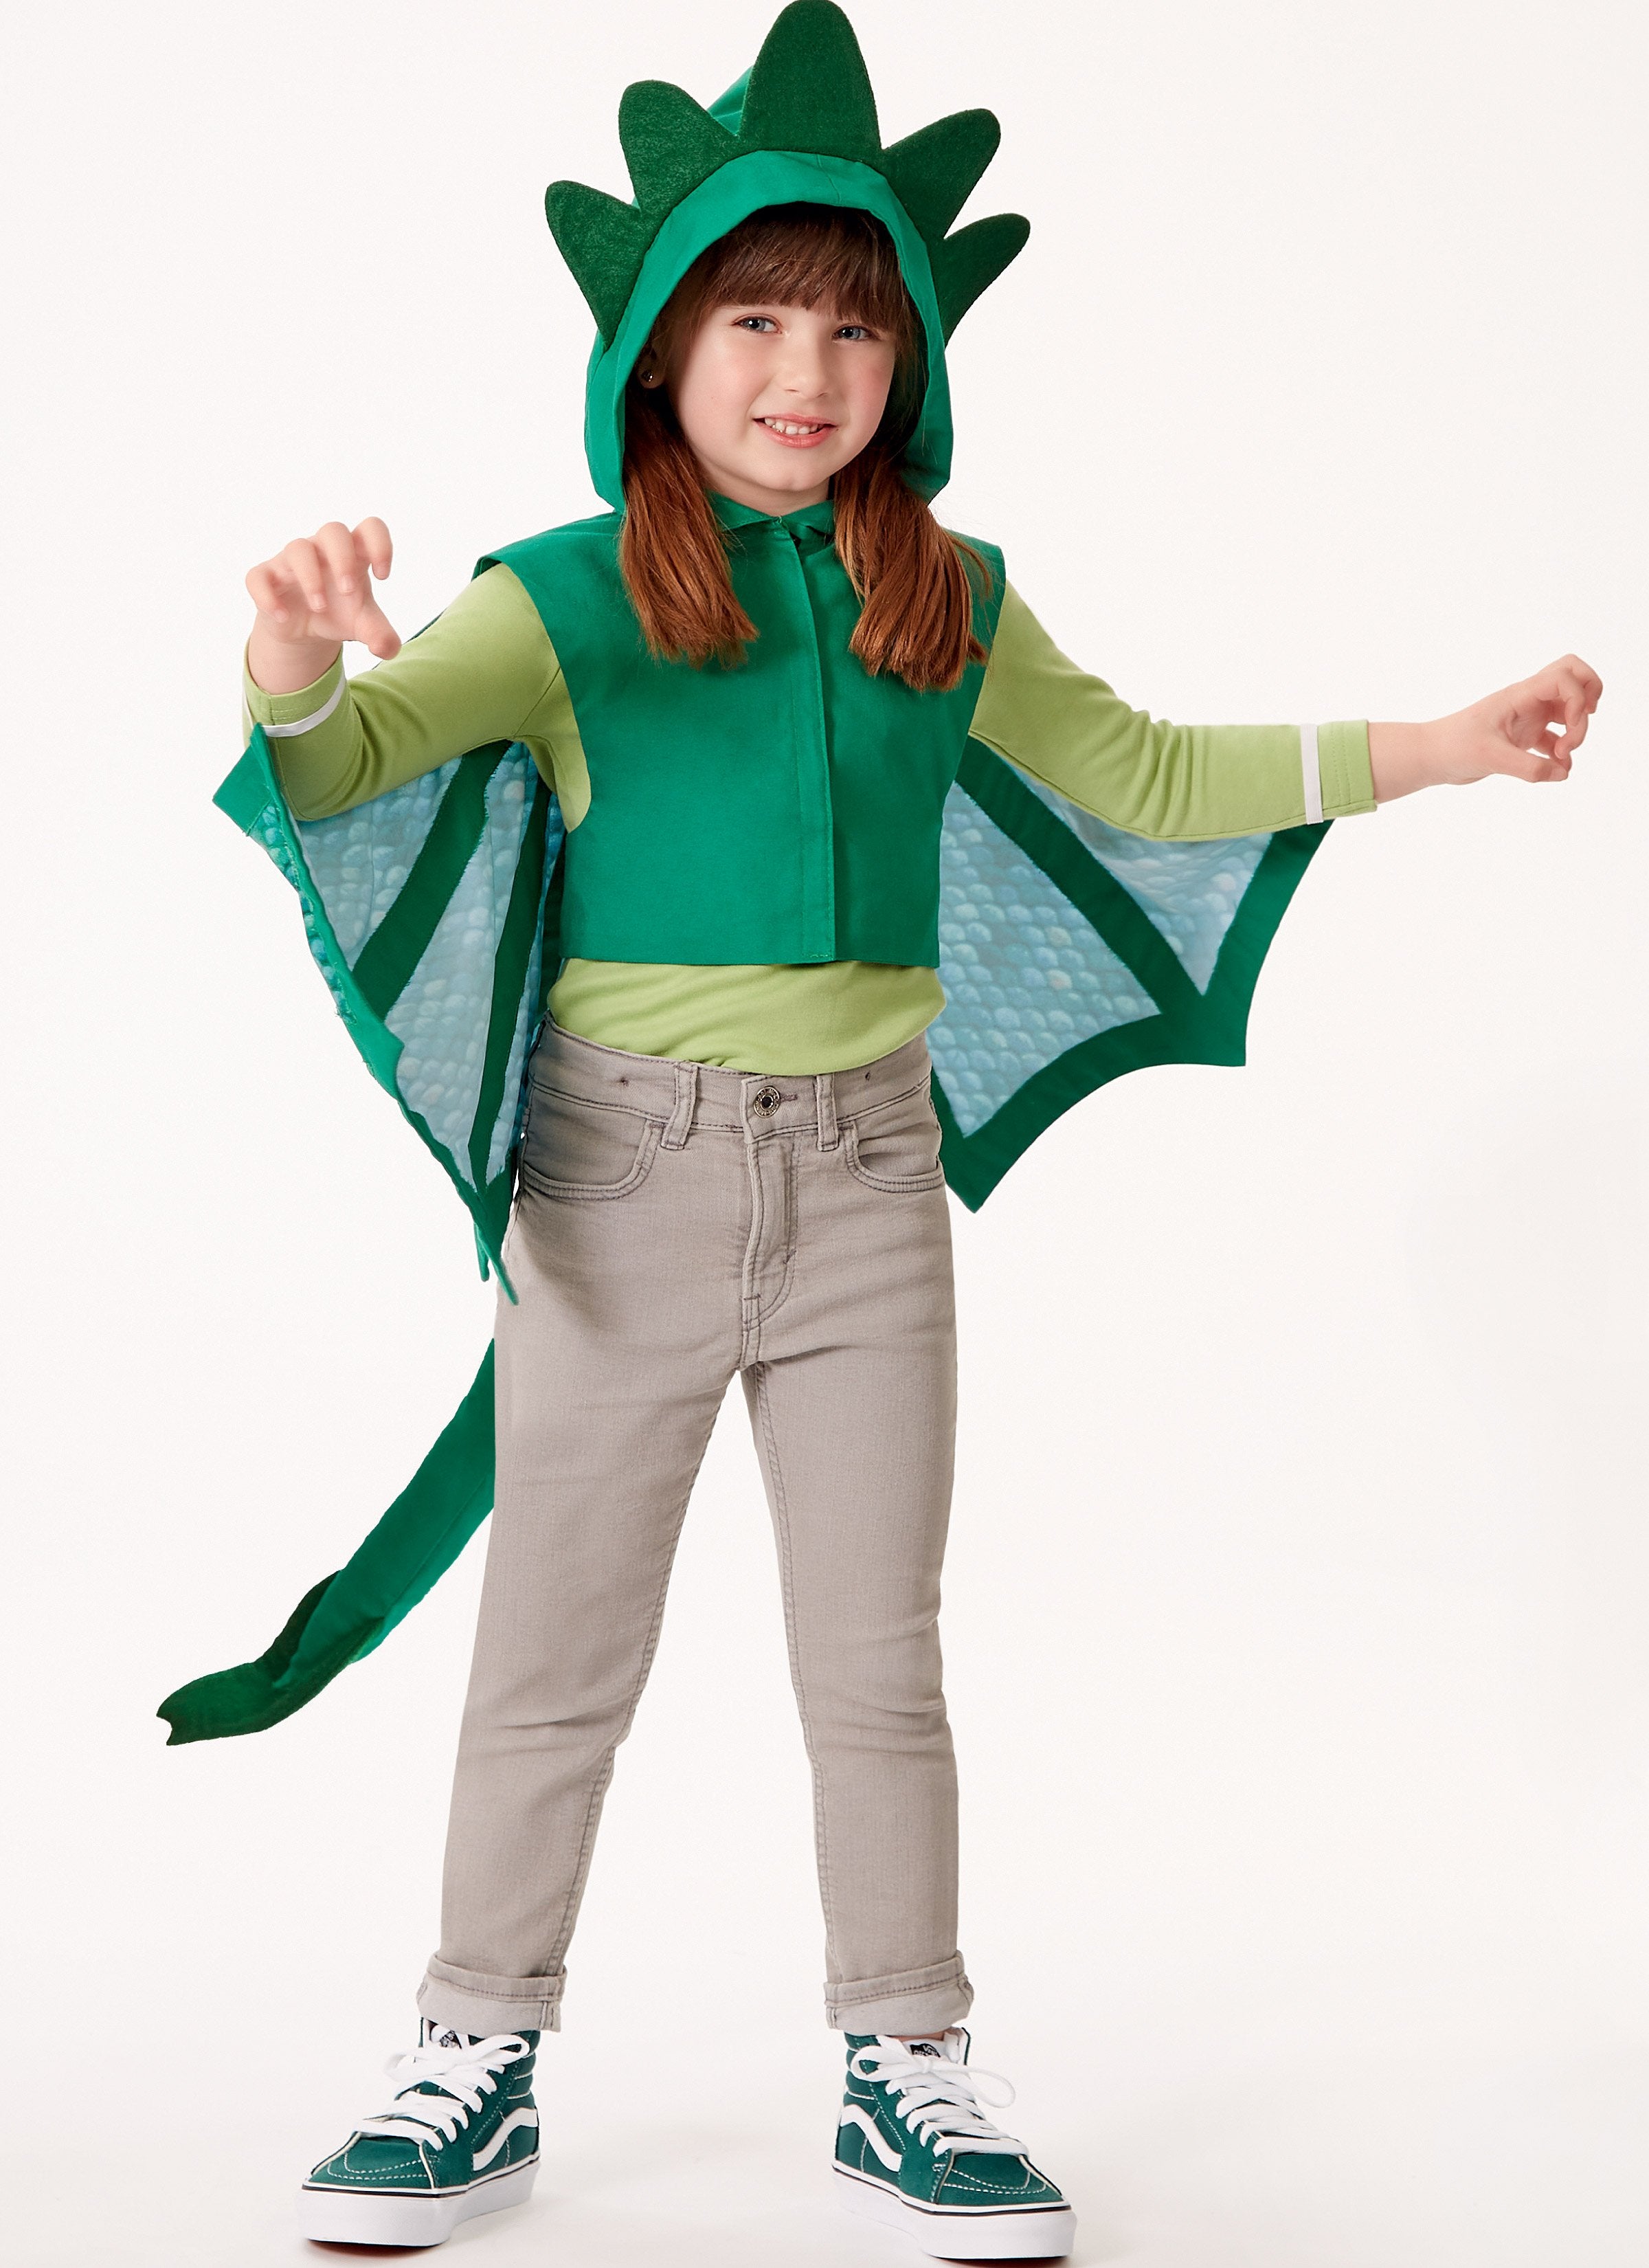 McCall's sewing pattern 8225 Kids' Dragon Cape and Mask from Jaycotts Sewing Supplies